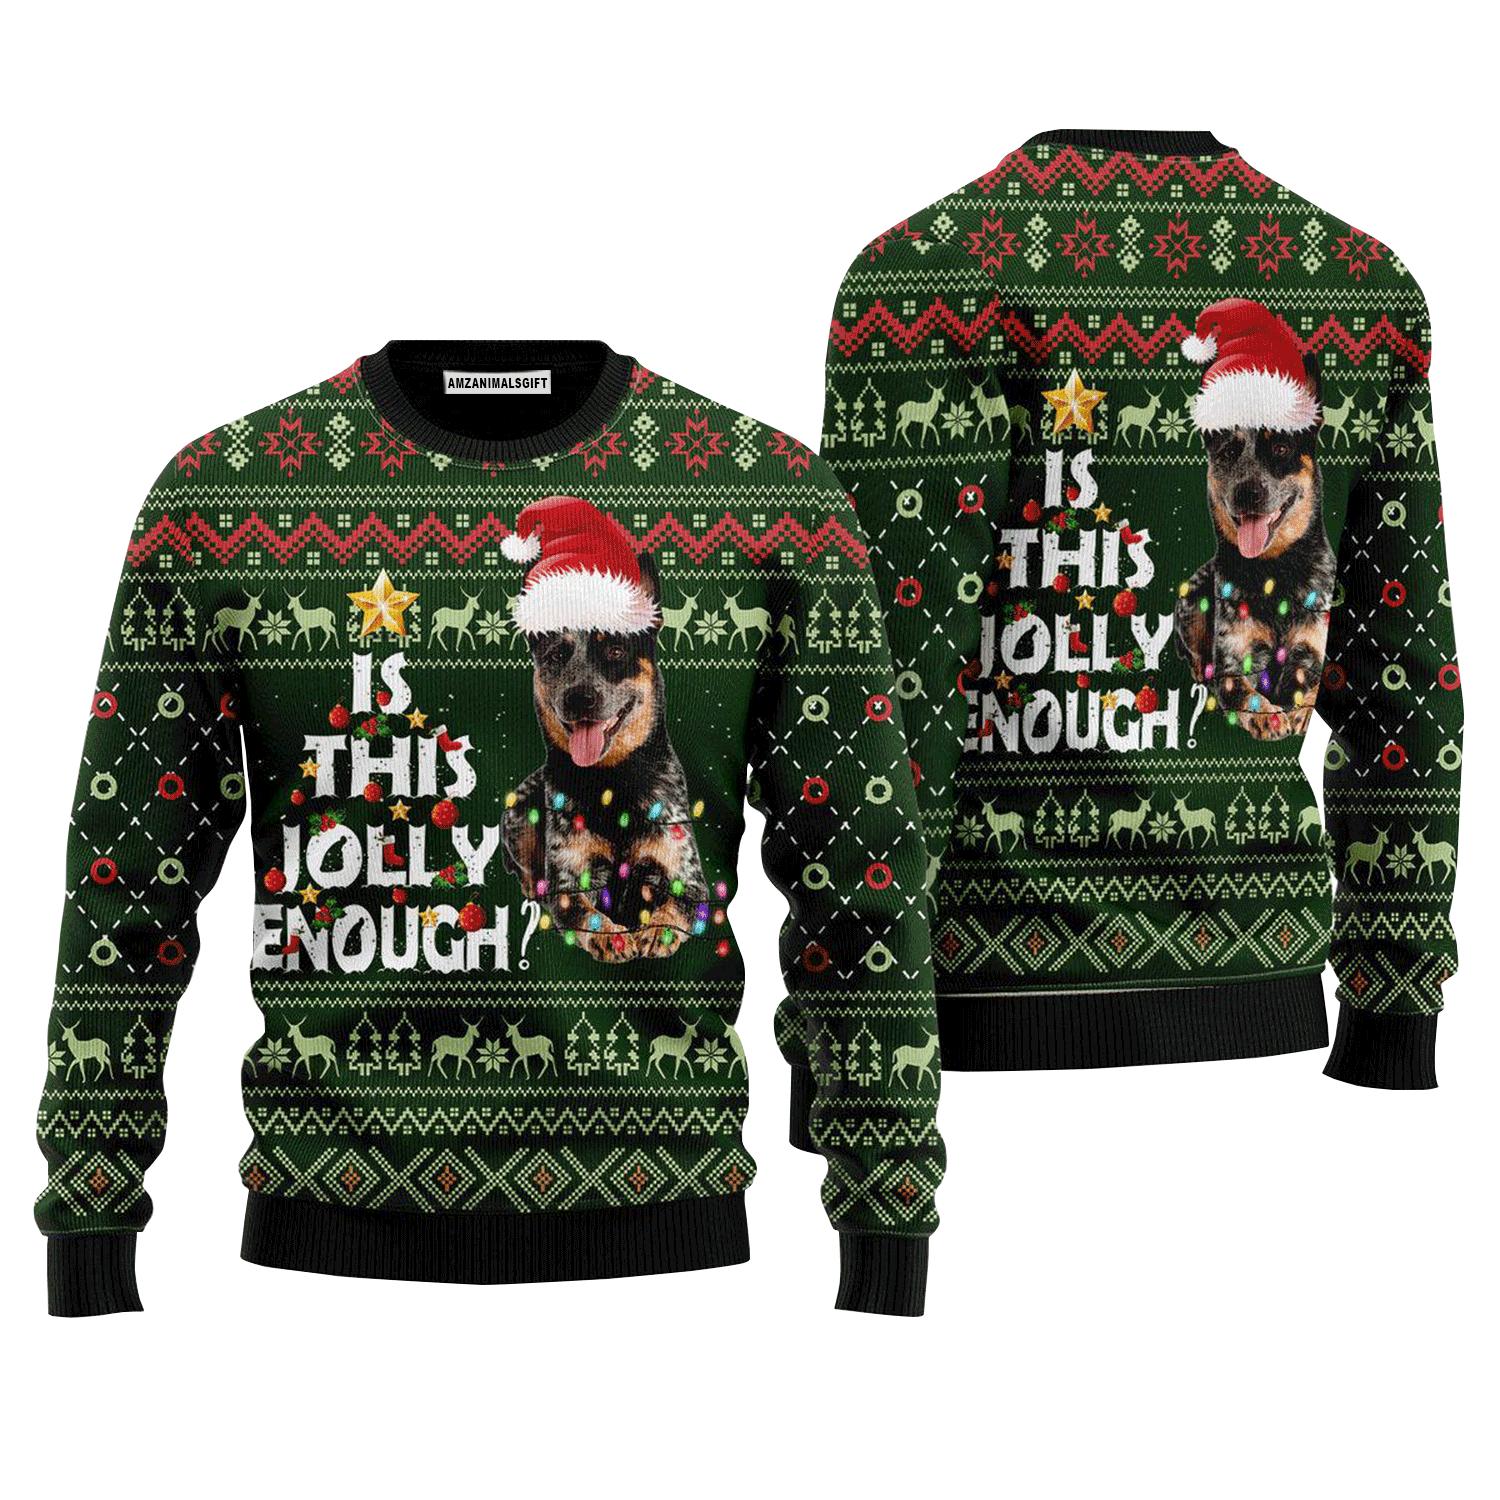 Australian Cattle Dog Jolly Sweater, Ugly Sweater For Men & Women, Perfect Outfit For Christmas New Year Autumn Winter